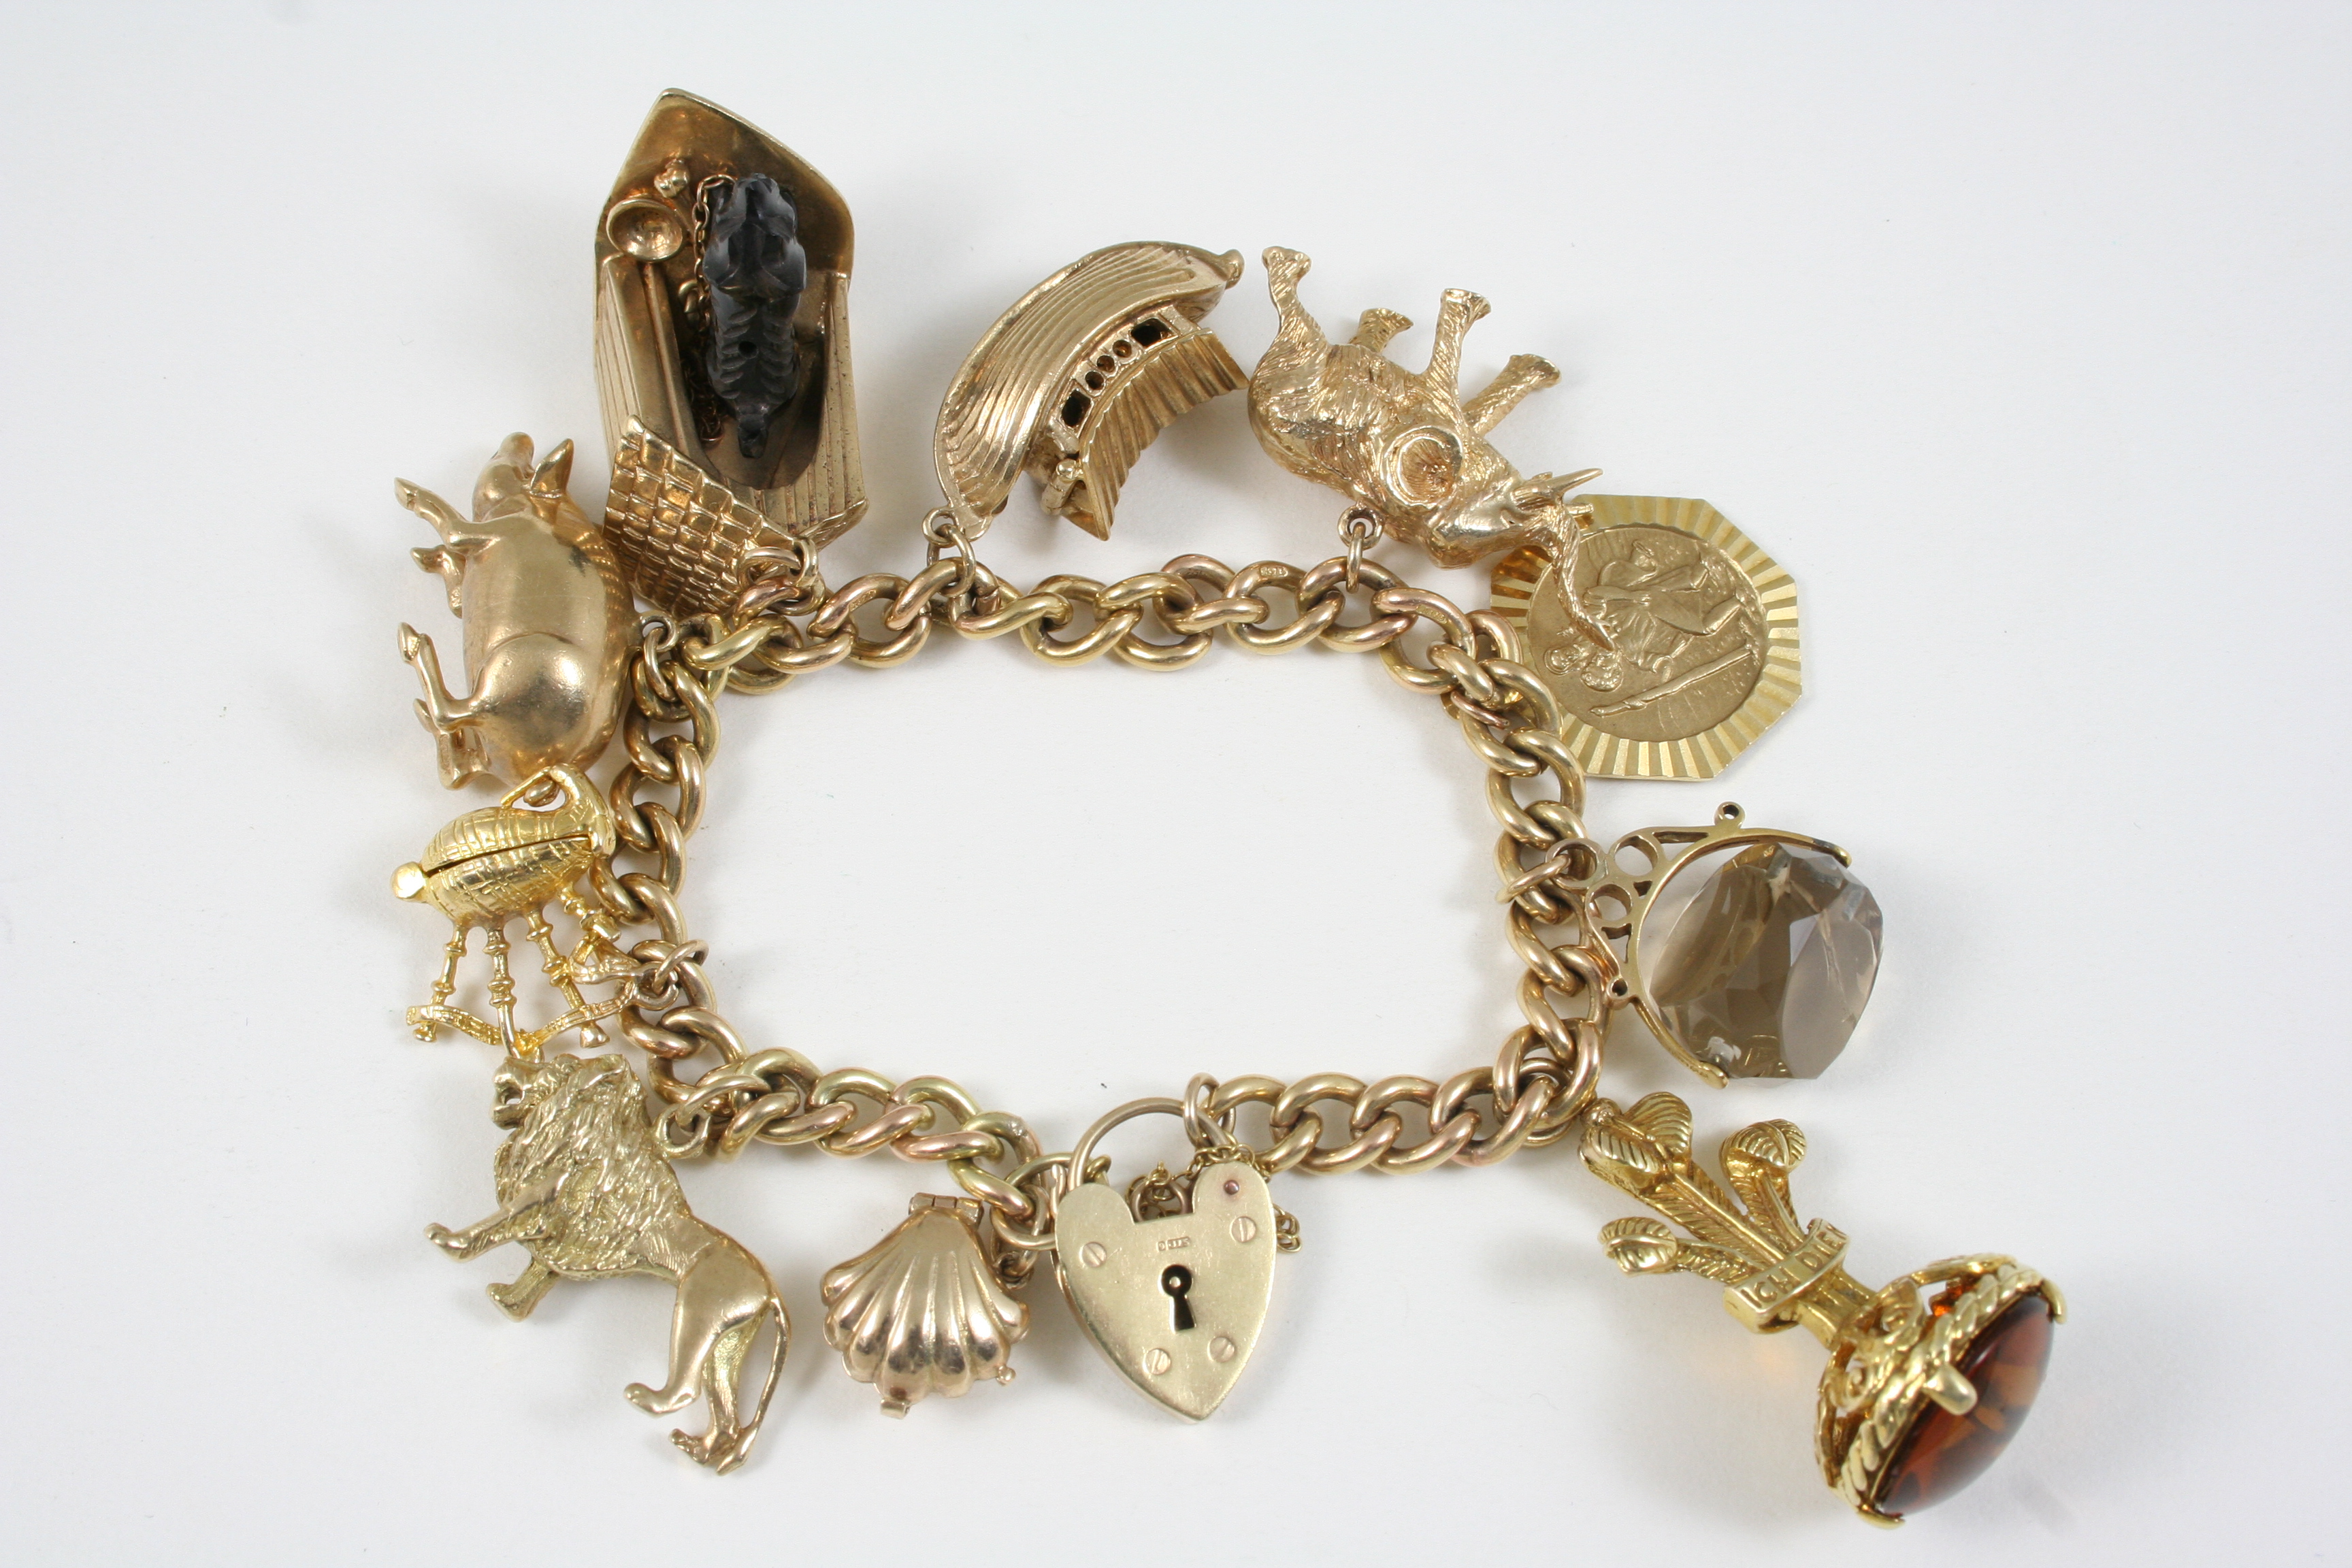 A 9CT. GOLD CURB LINK CHARM BRACELET with padlock clasp, and set with assorted gold charms, 86